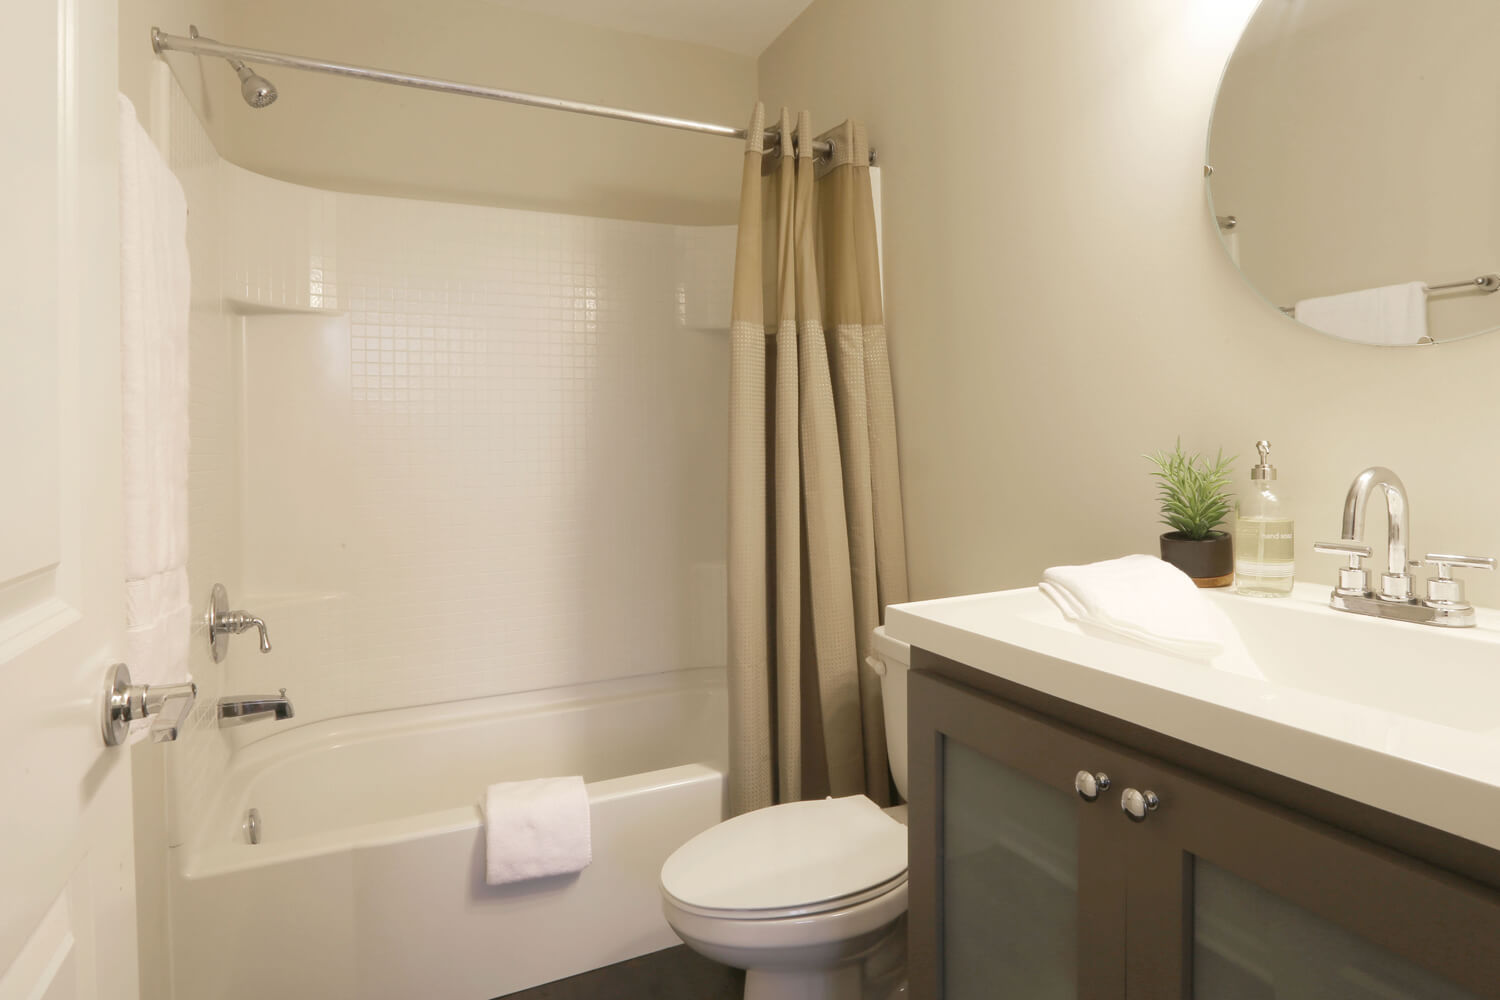 The 40 Four Building Designed by Foshee Architecture – Apartment Bathroom